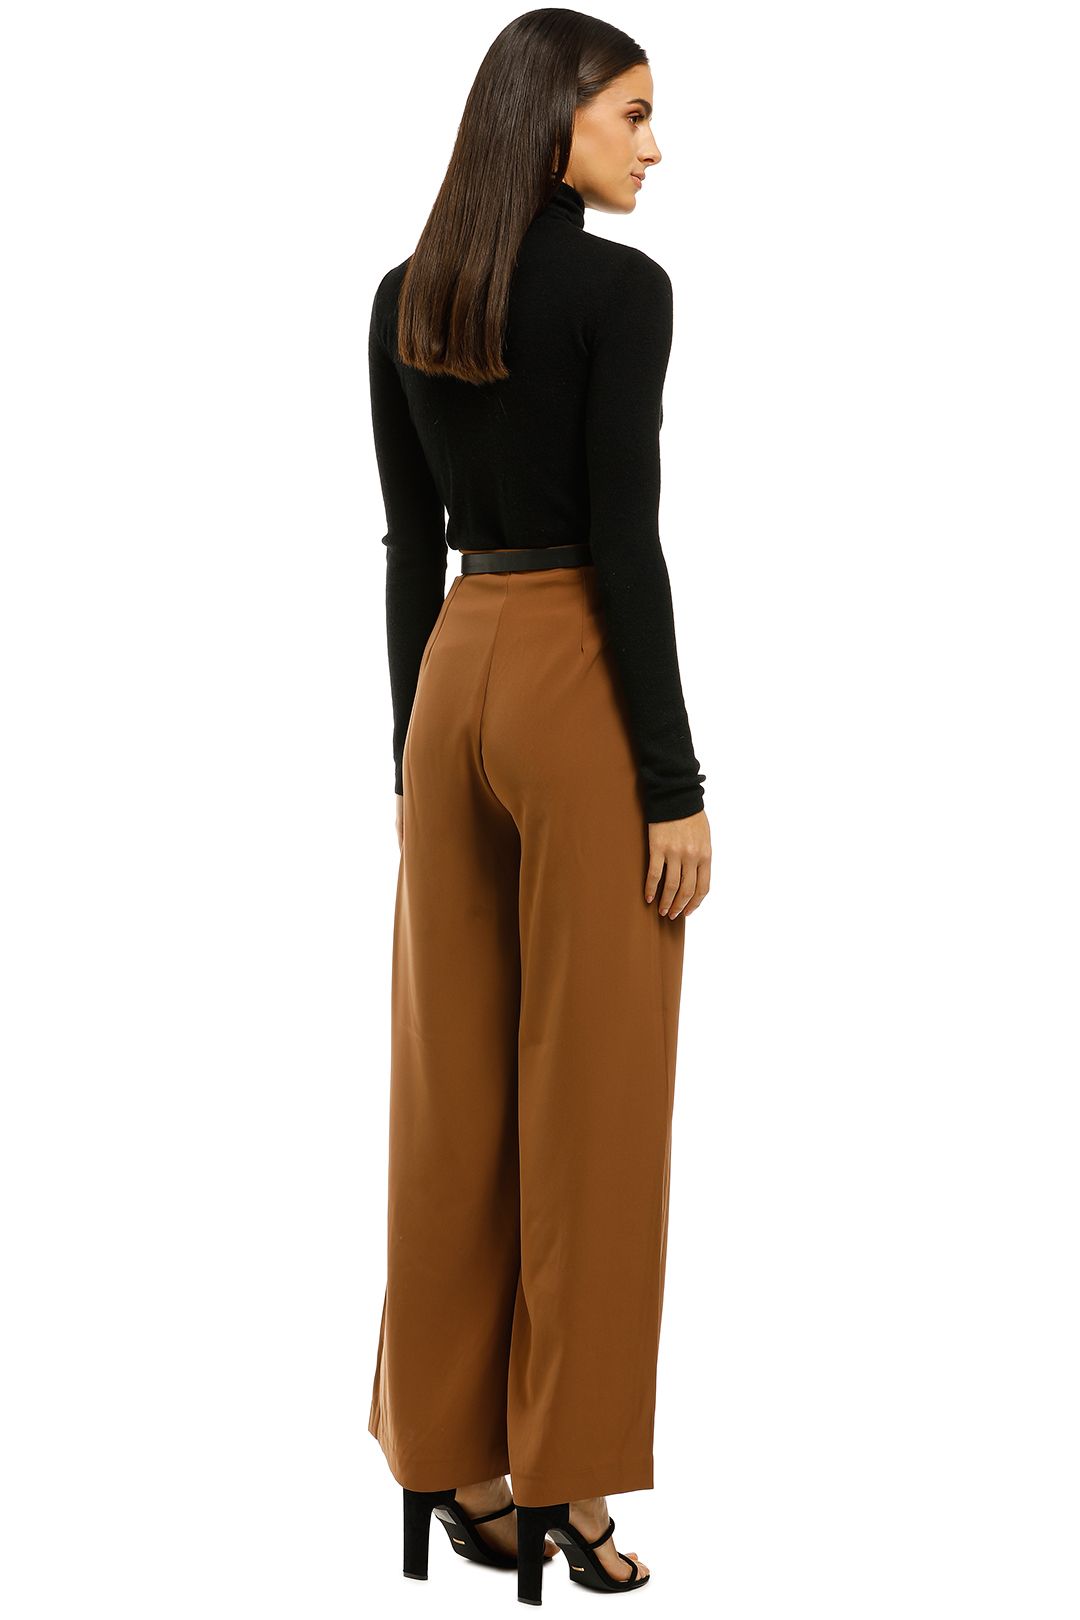 Friend of Audrey - Pleated Wide Pant - Tan - Back